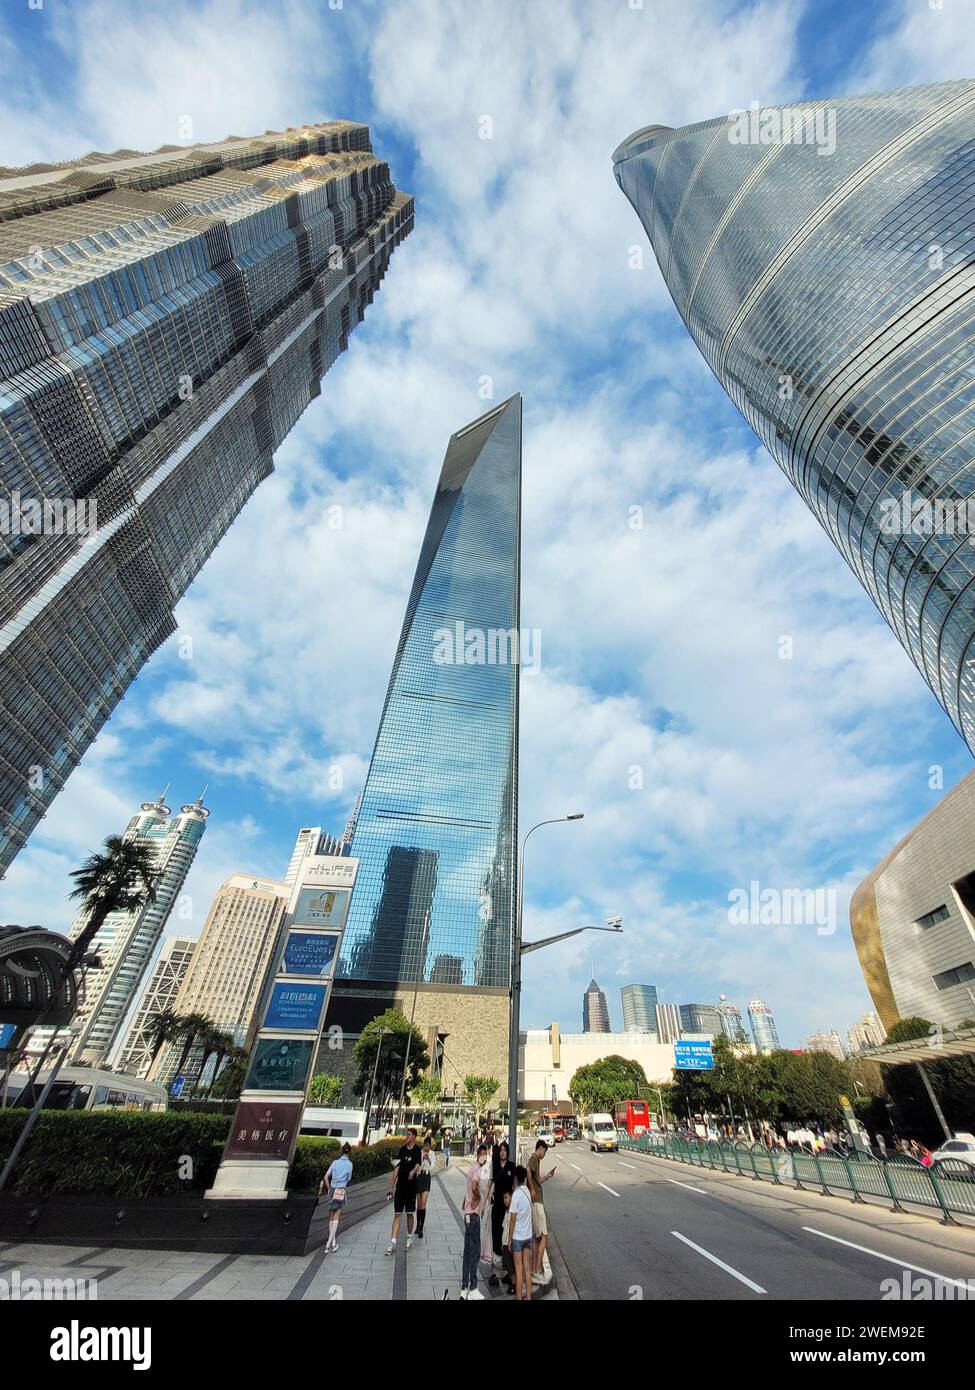 Shanghai tower, Shanghai World Financial tower and Jin Mao tower in Pudong modern business district in Shanghai, China Stock Photo